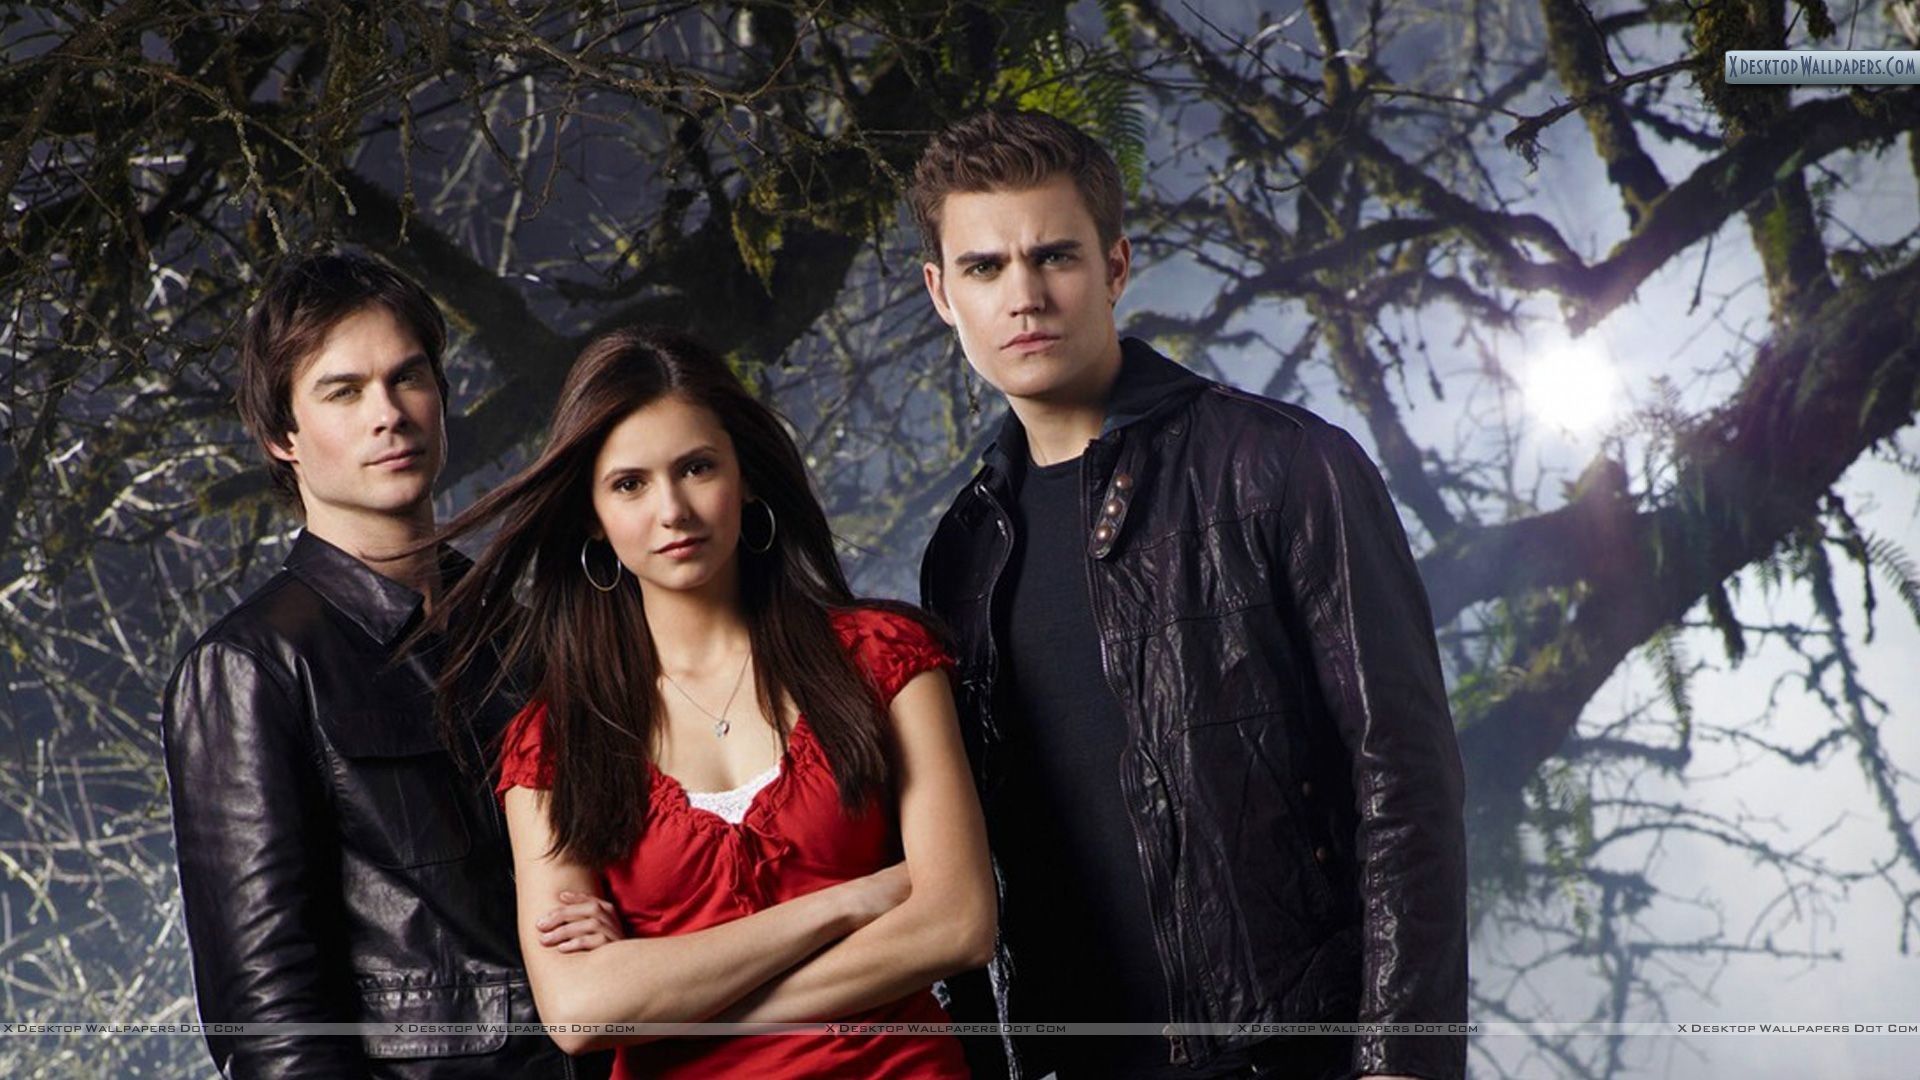 1920x1080 You are viewing wallpaper titled "Vampire Diaries ...